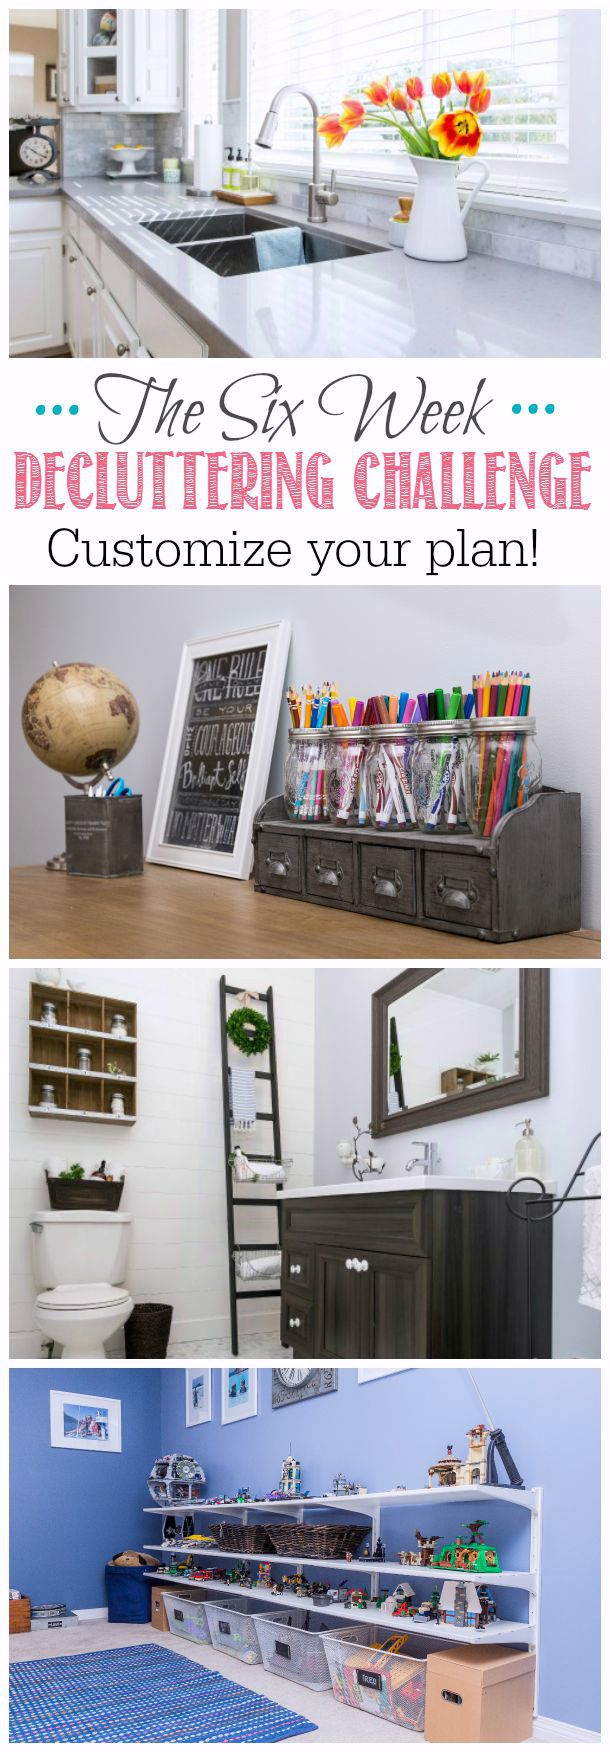 Take 6 weeks to declutter and organize all of the major spaces in your home. Lots of organizational tips and ideas about where to start along with free printables to customize your plan!